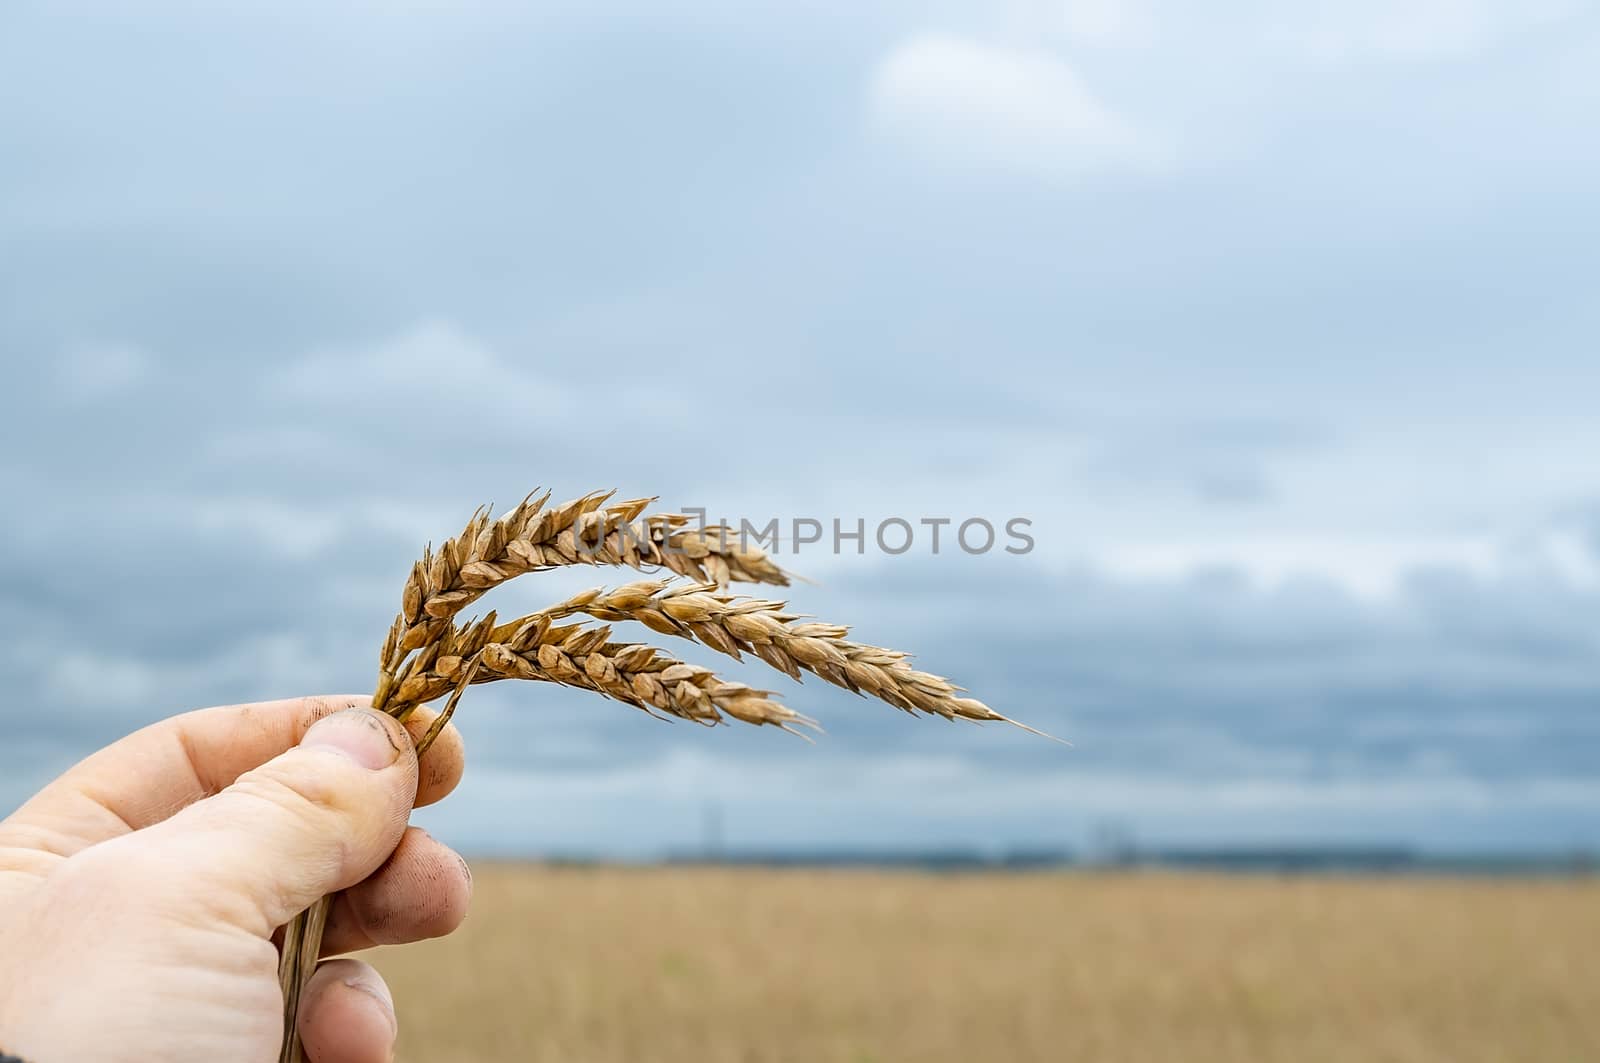 spikelet with wheat grains in the hand of a man by jk3030